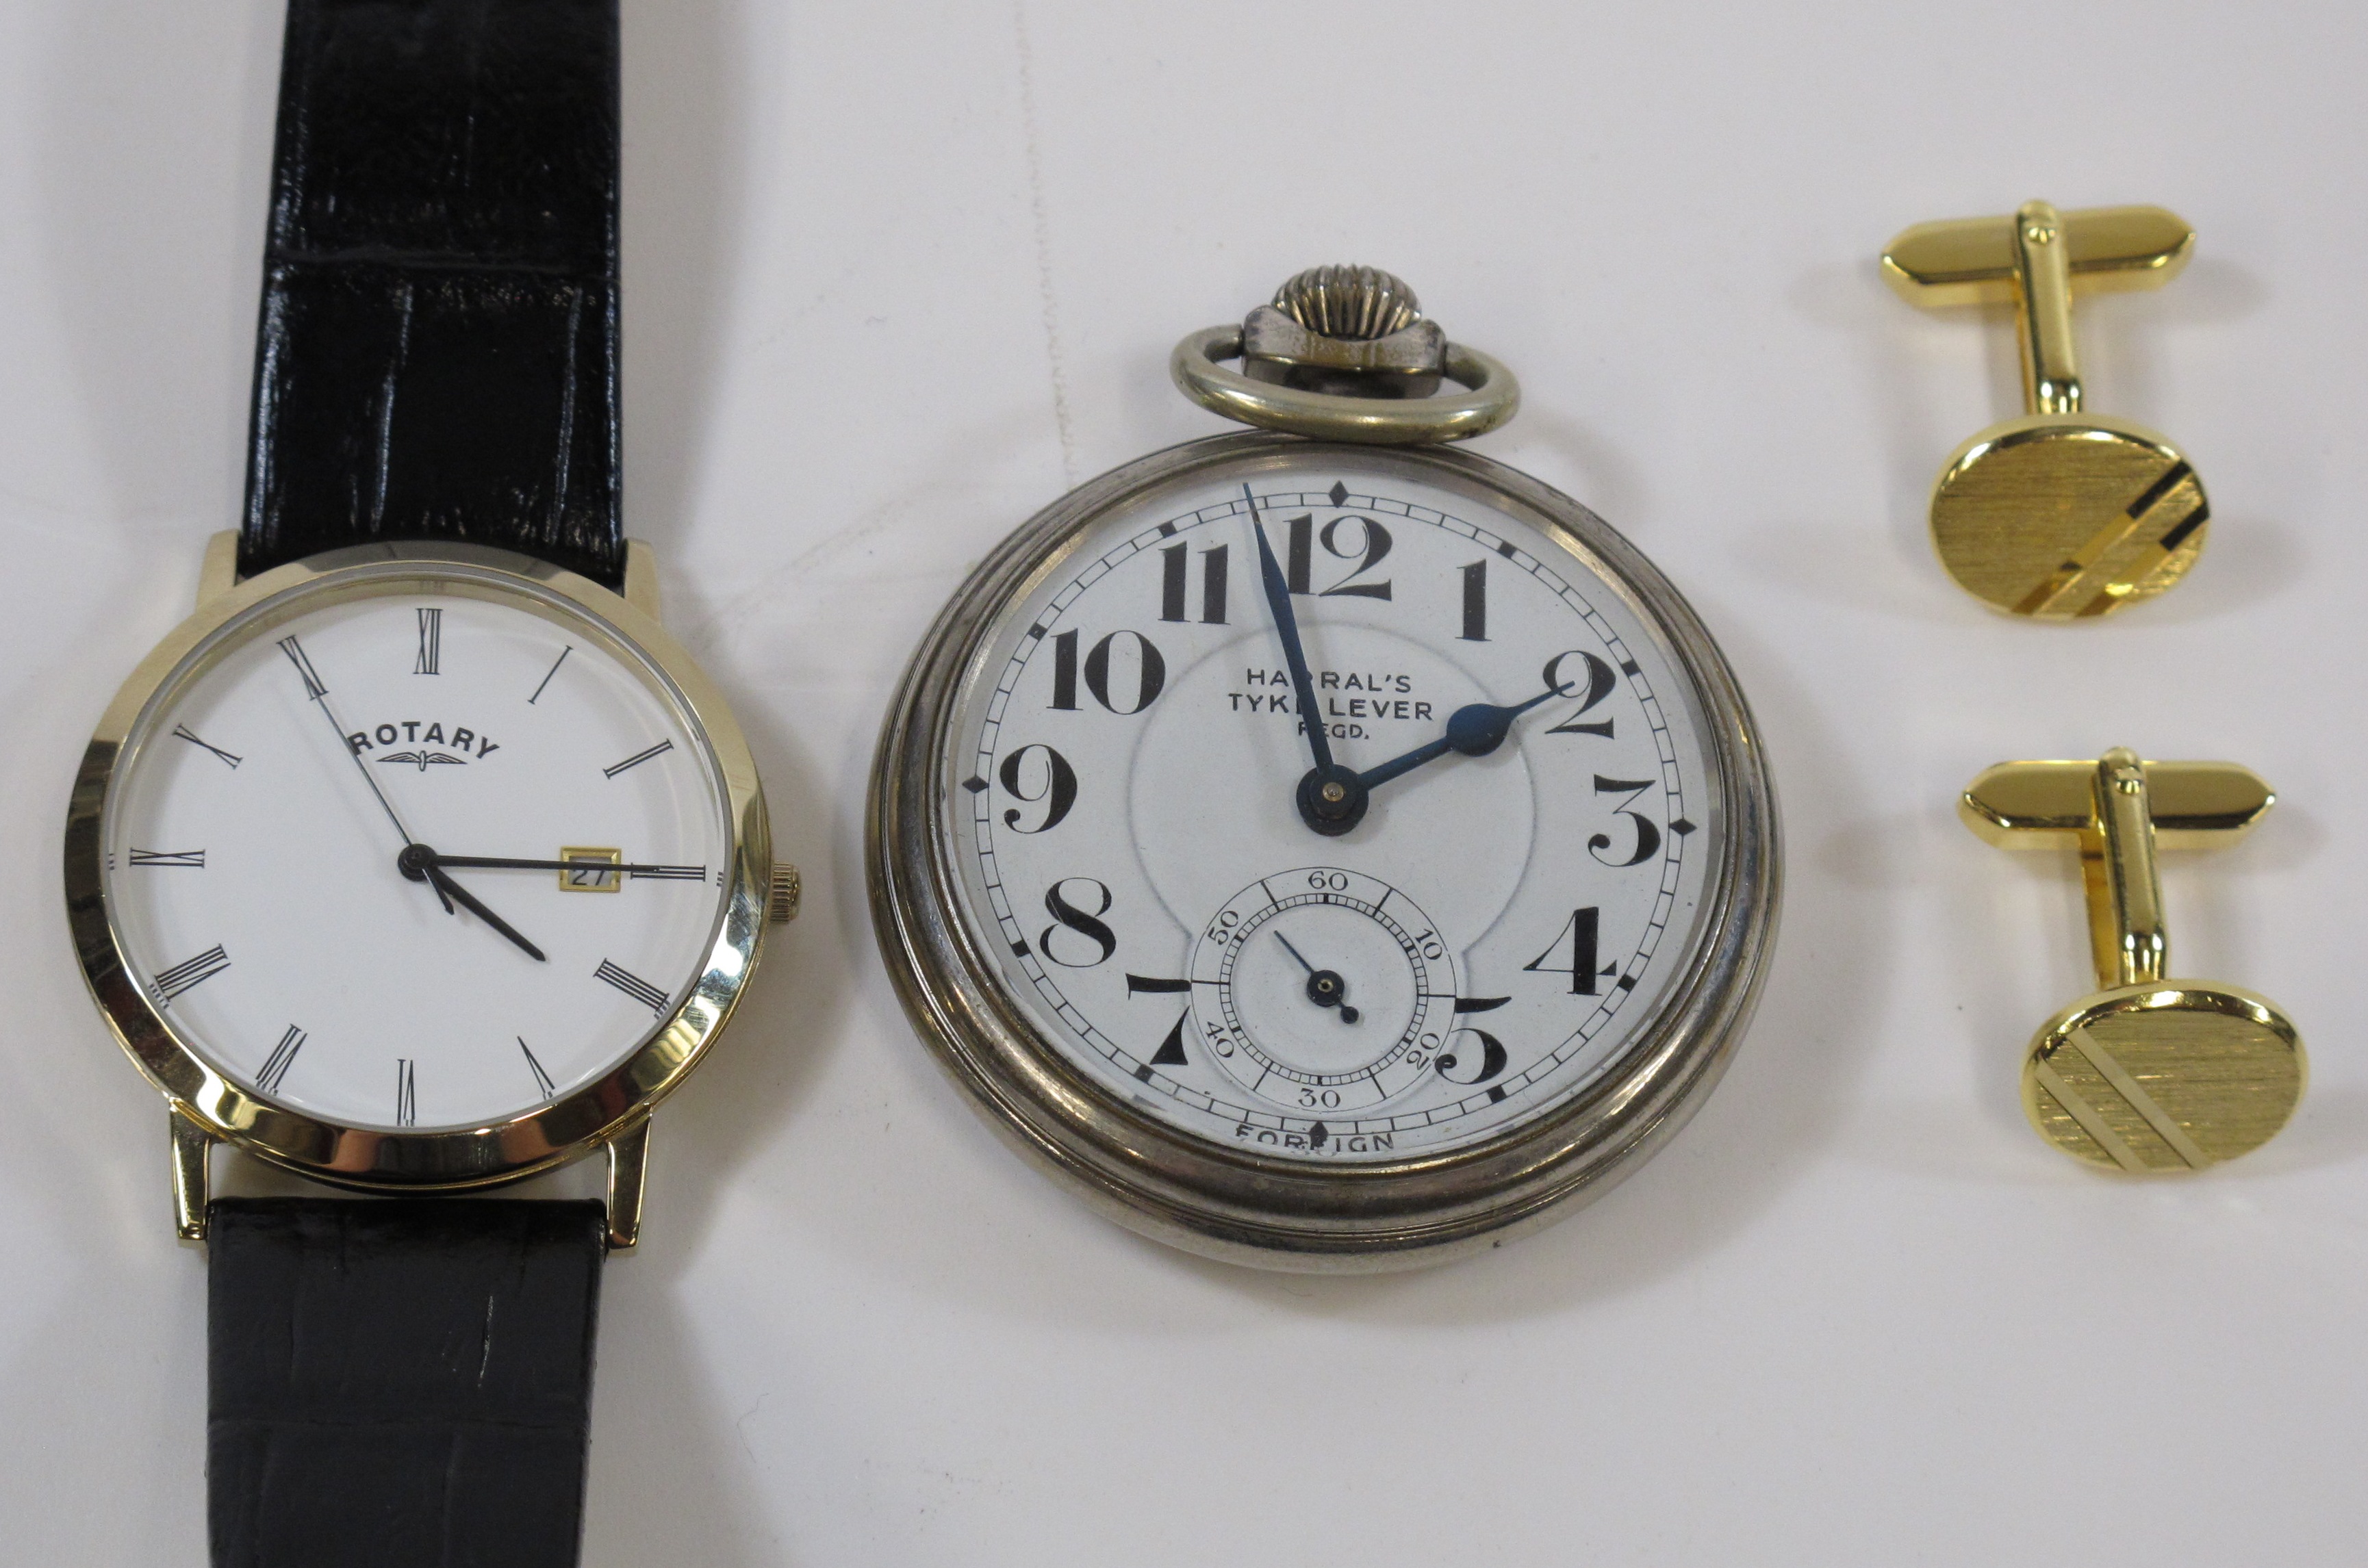 "Harral`s Tyke Lever pocket watch, Gents Rotary Watch & a pair of Gold coloured cufflinks (est. £